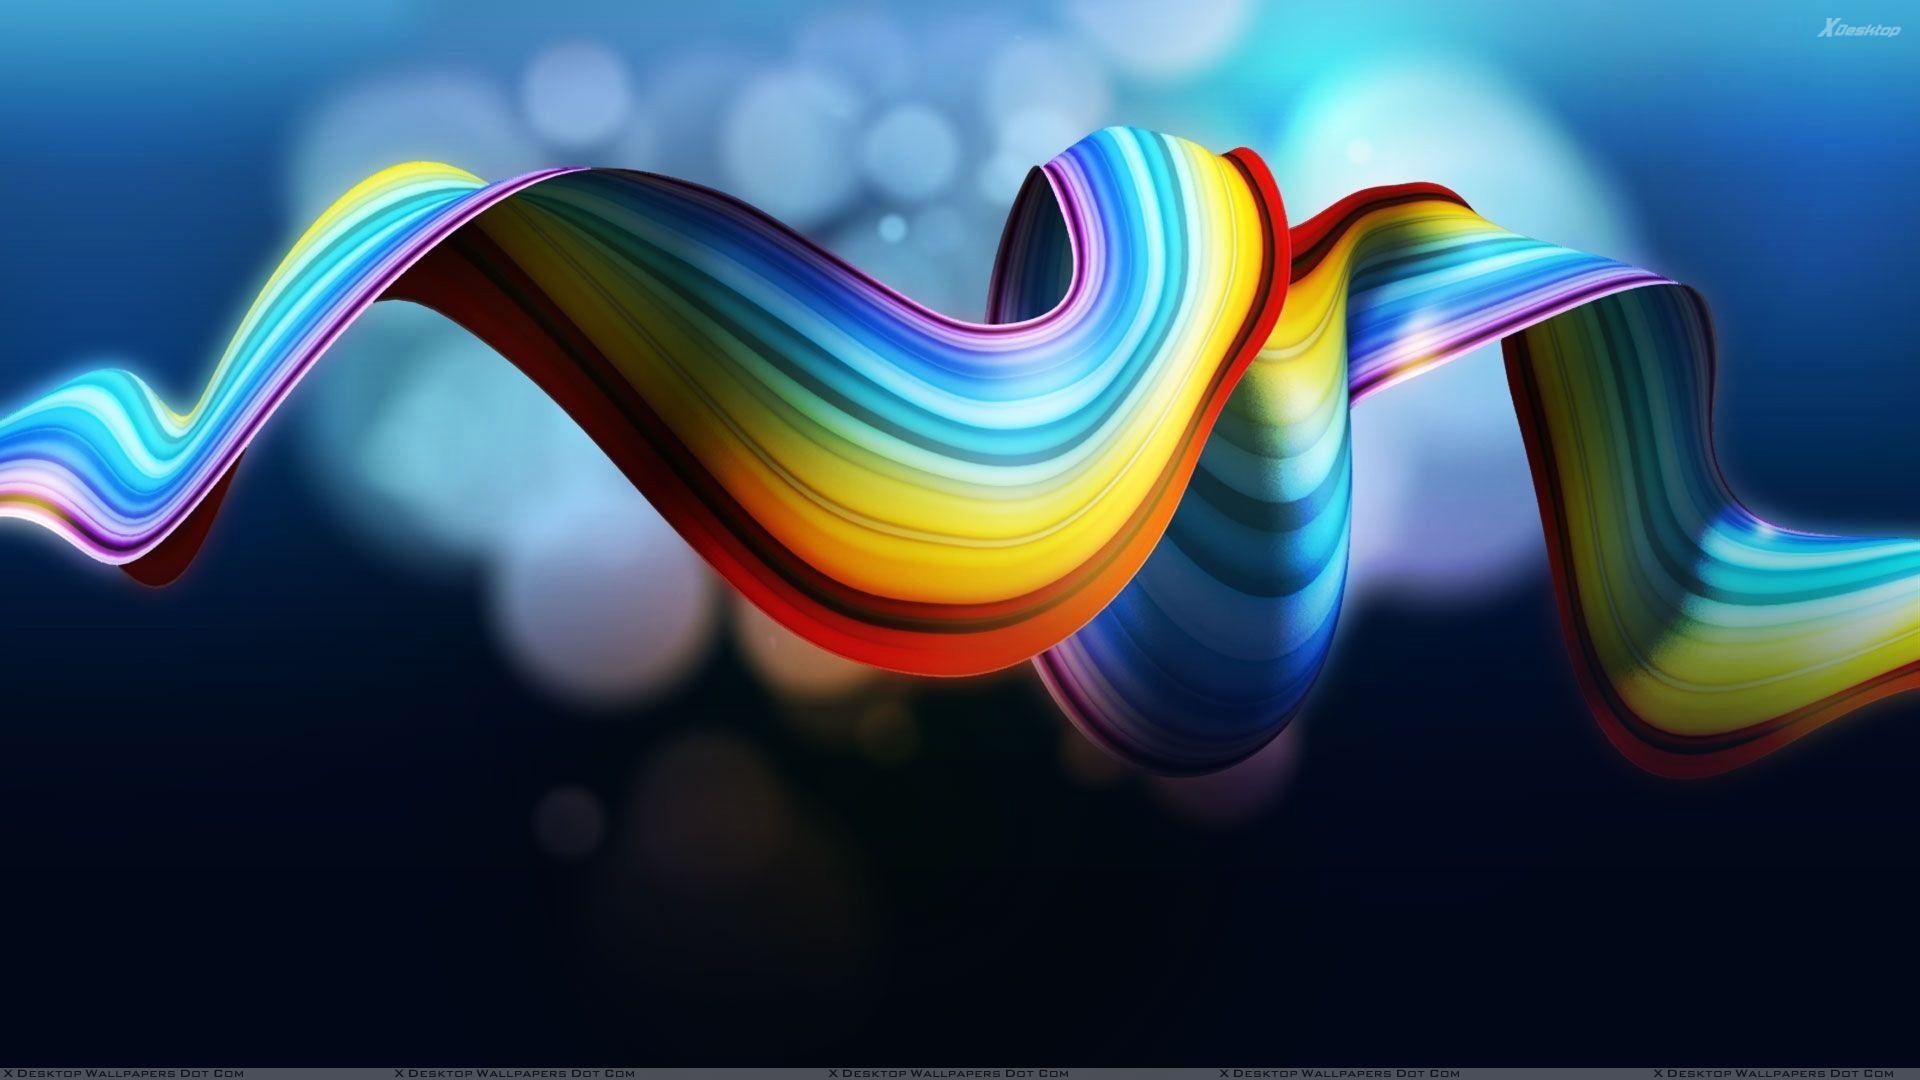 Cool Rainbow Abstract Wallpaper